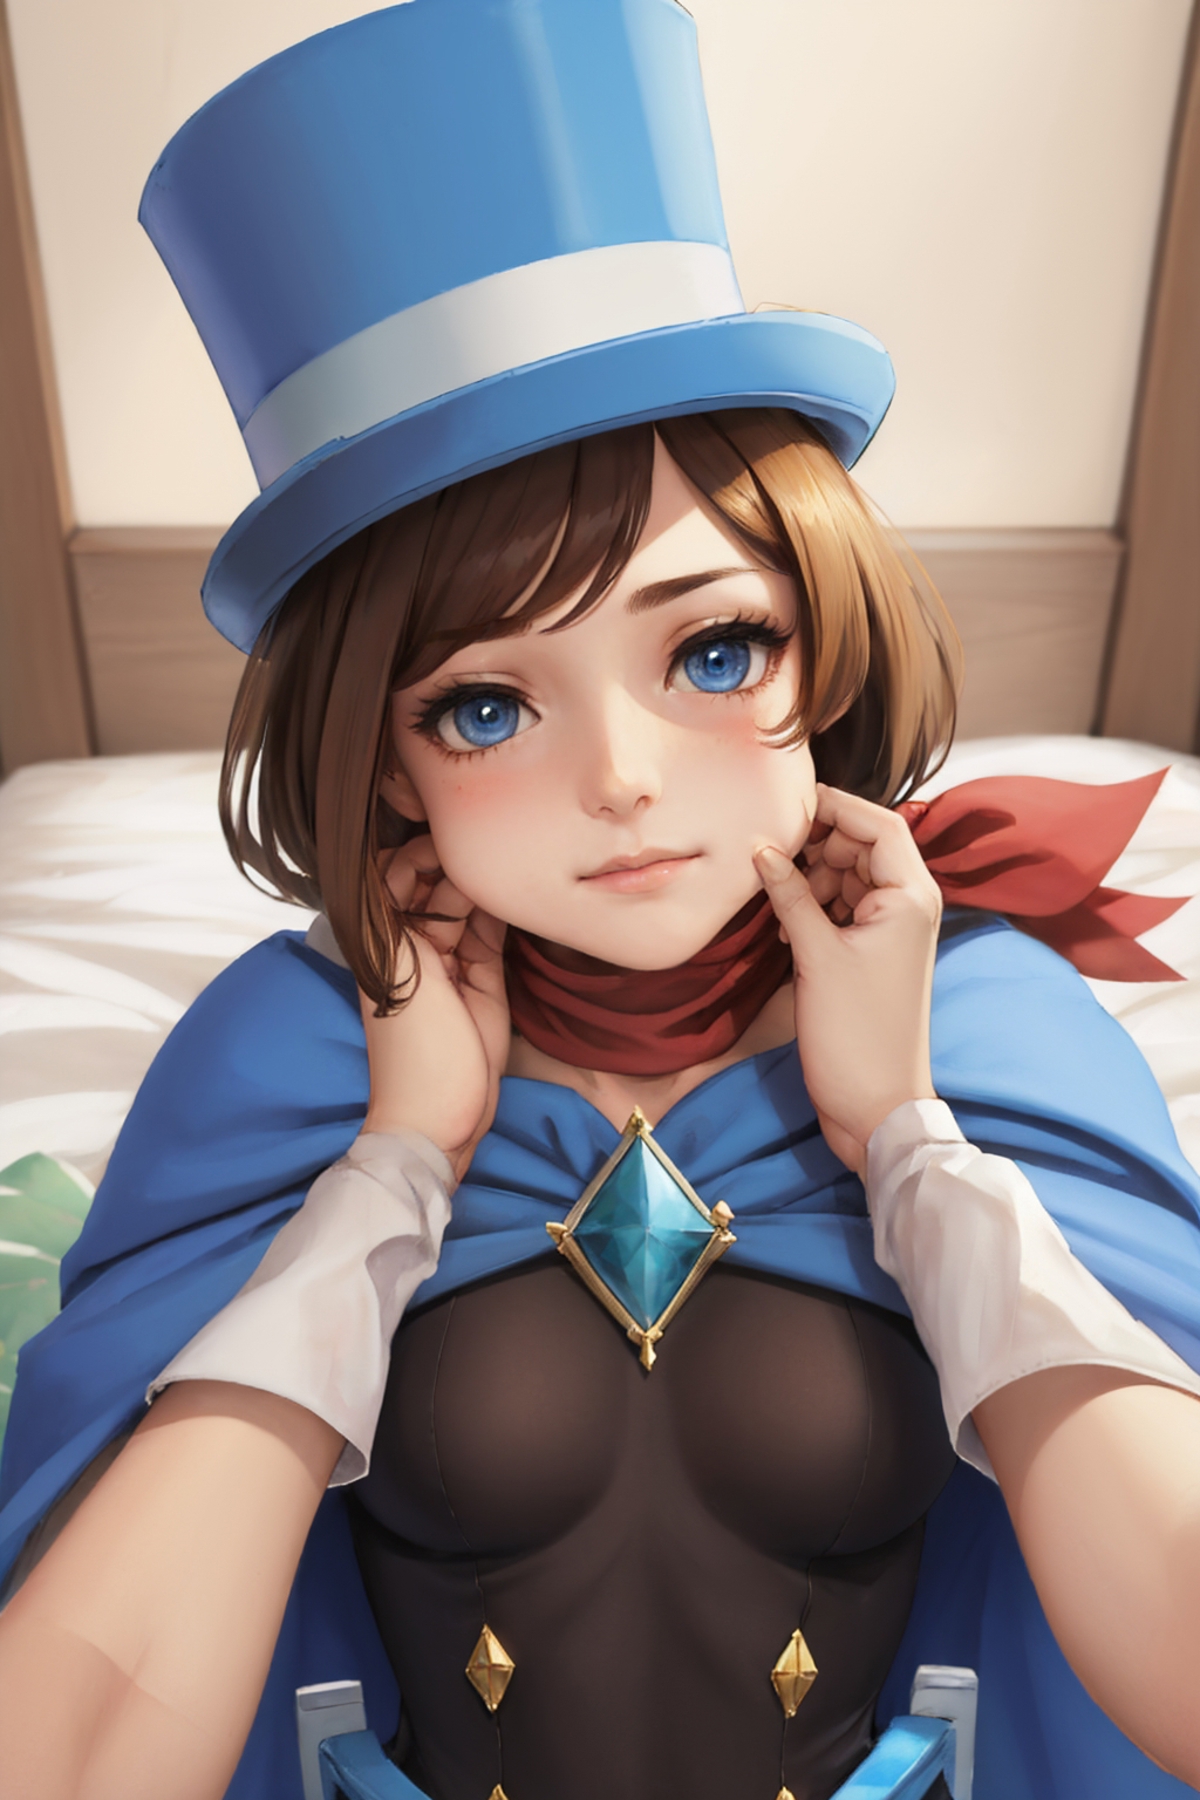 Trucy Wright | Ace Attorney image by justTNP